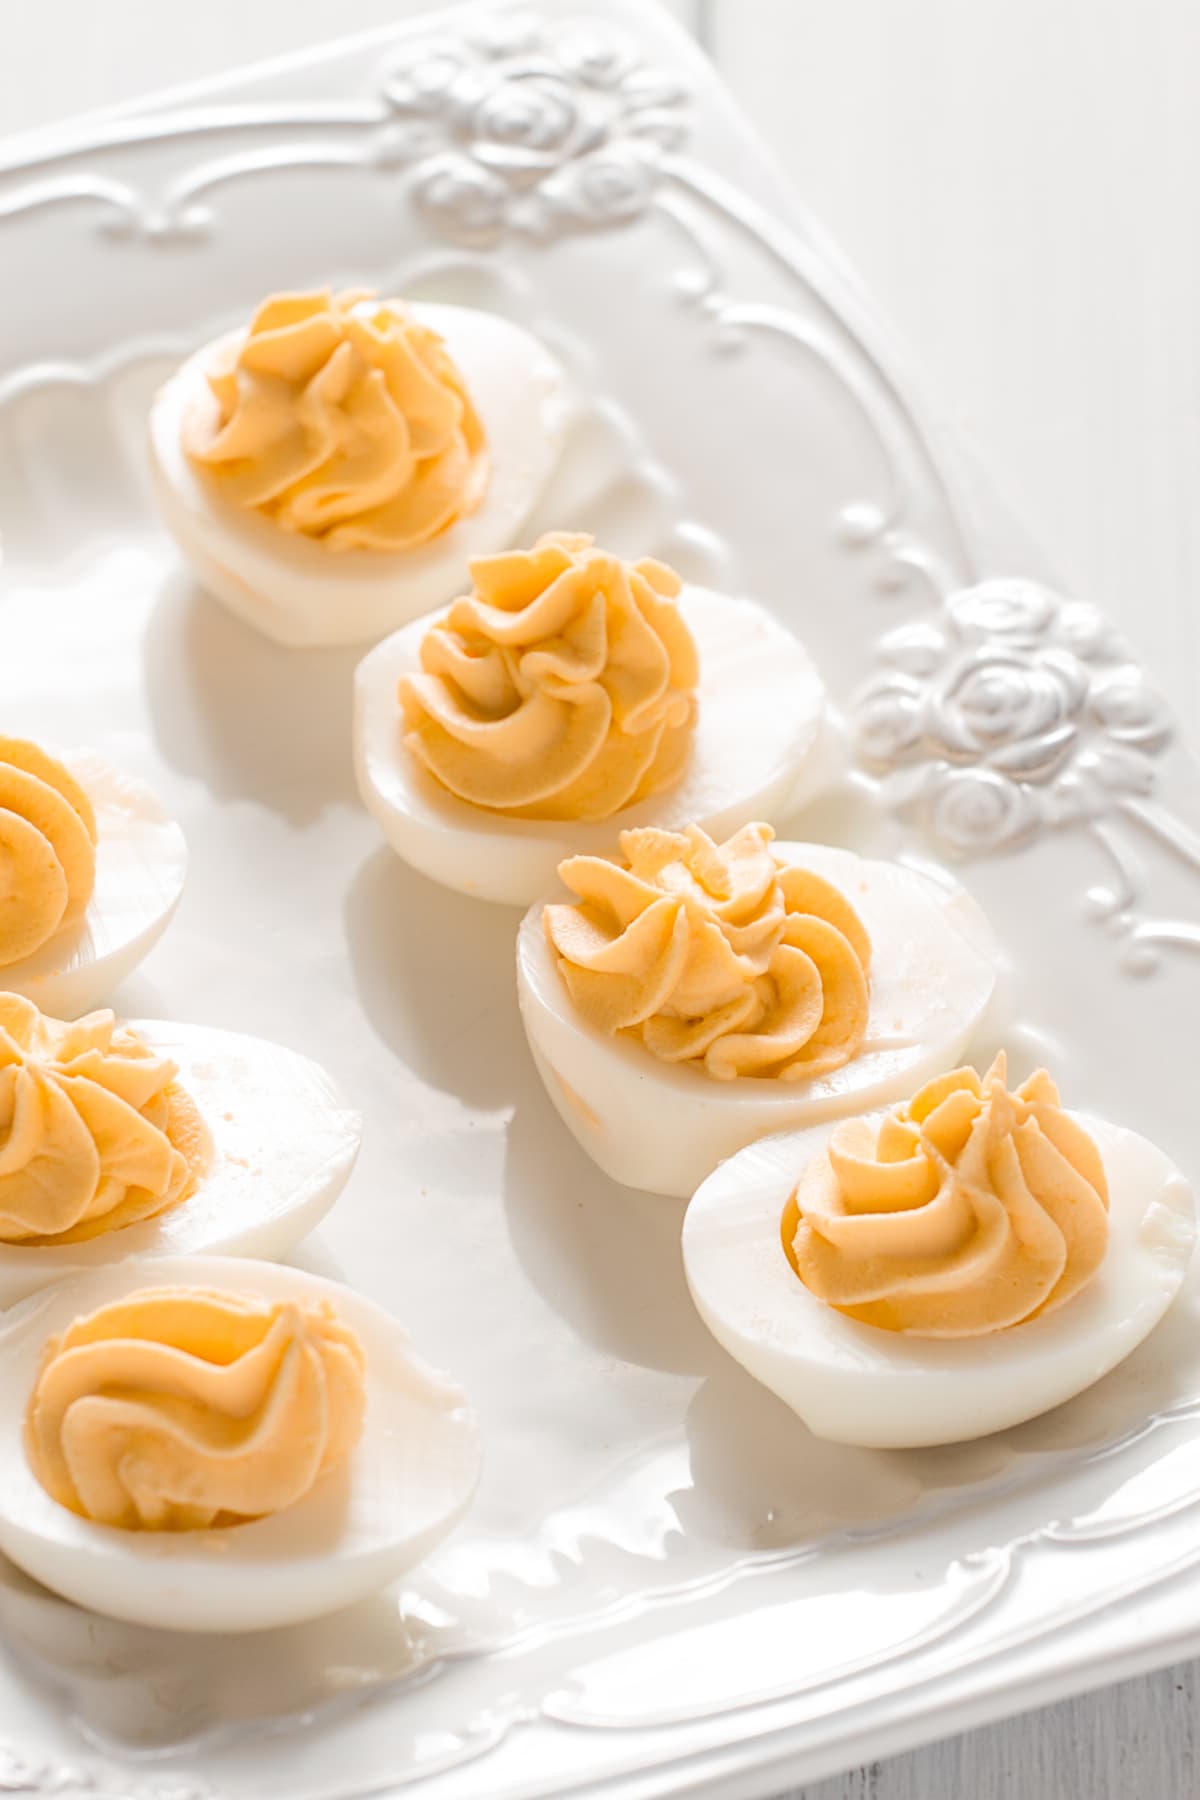 Boiled eggs stuffed with yolk with mayonnaise, on a white plate, selective focus, blurry, close-up, no people,